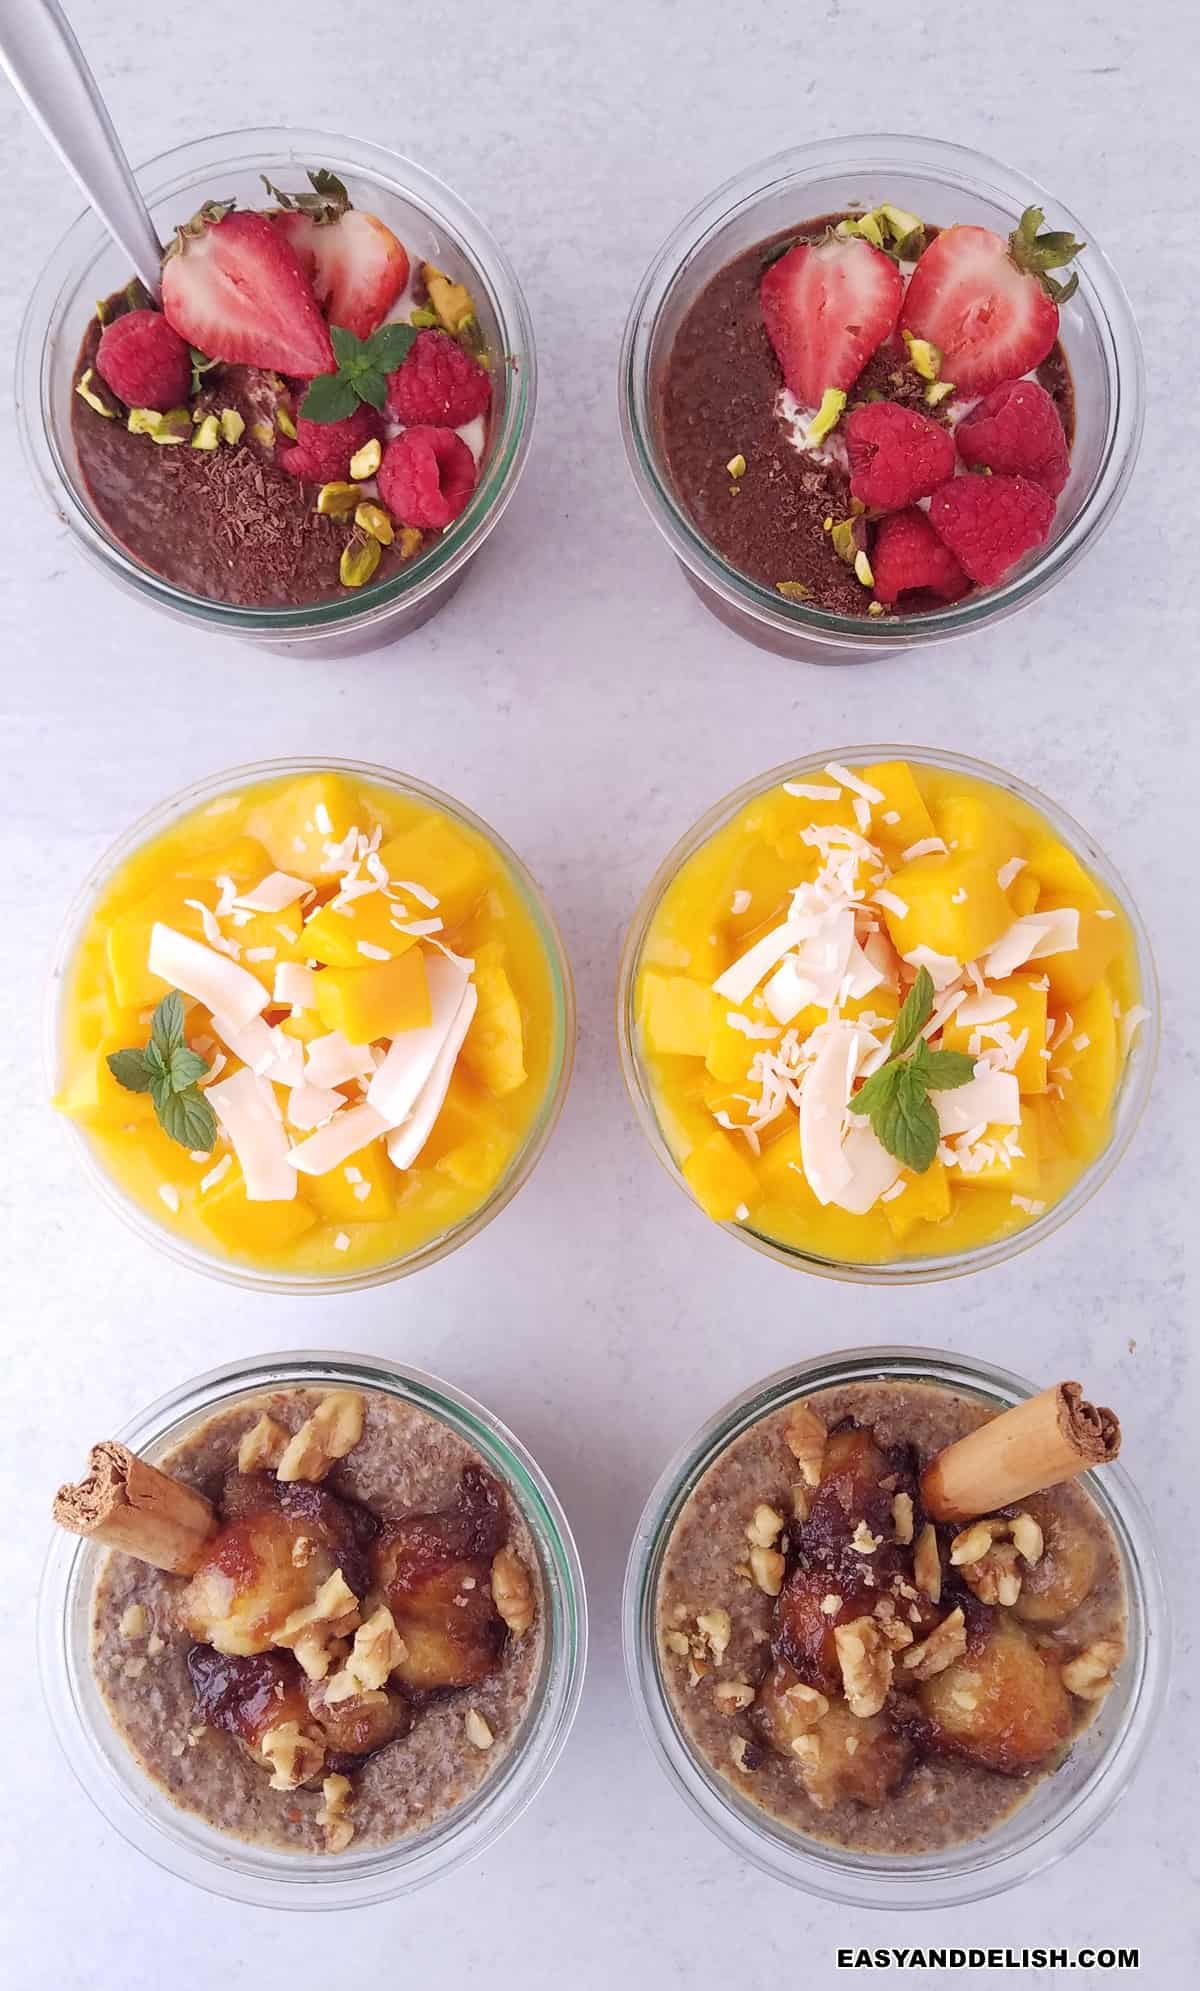 6 jars with 3 flavors of chia pudding: chocolate, coconut with mango, and banana on a table.